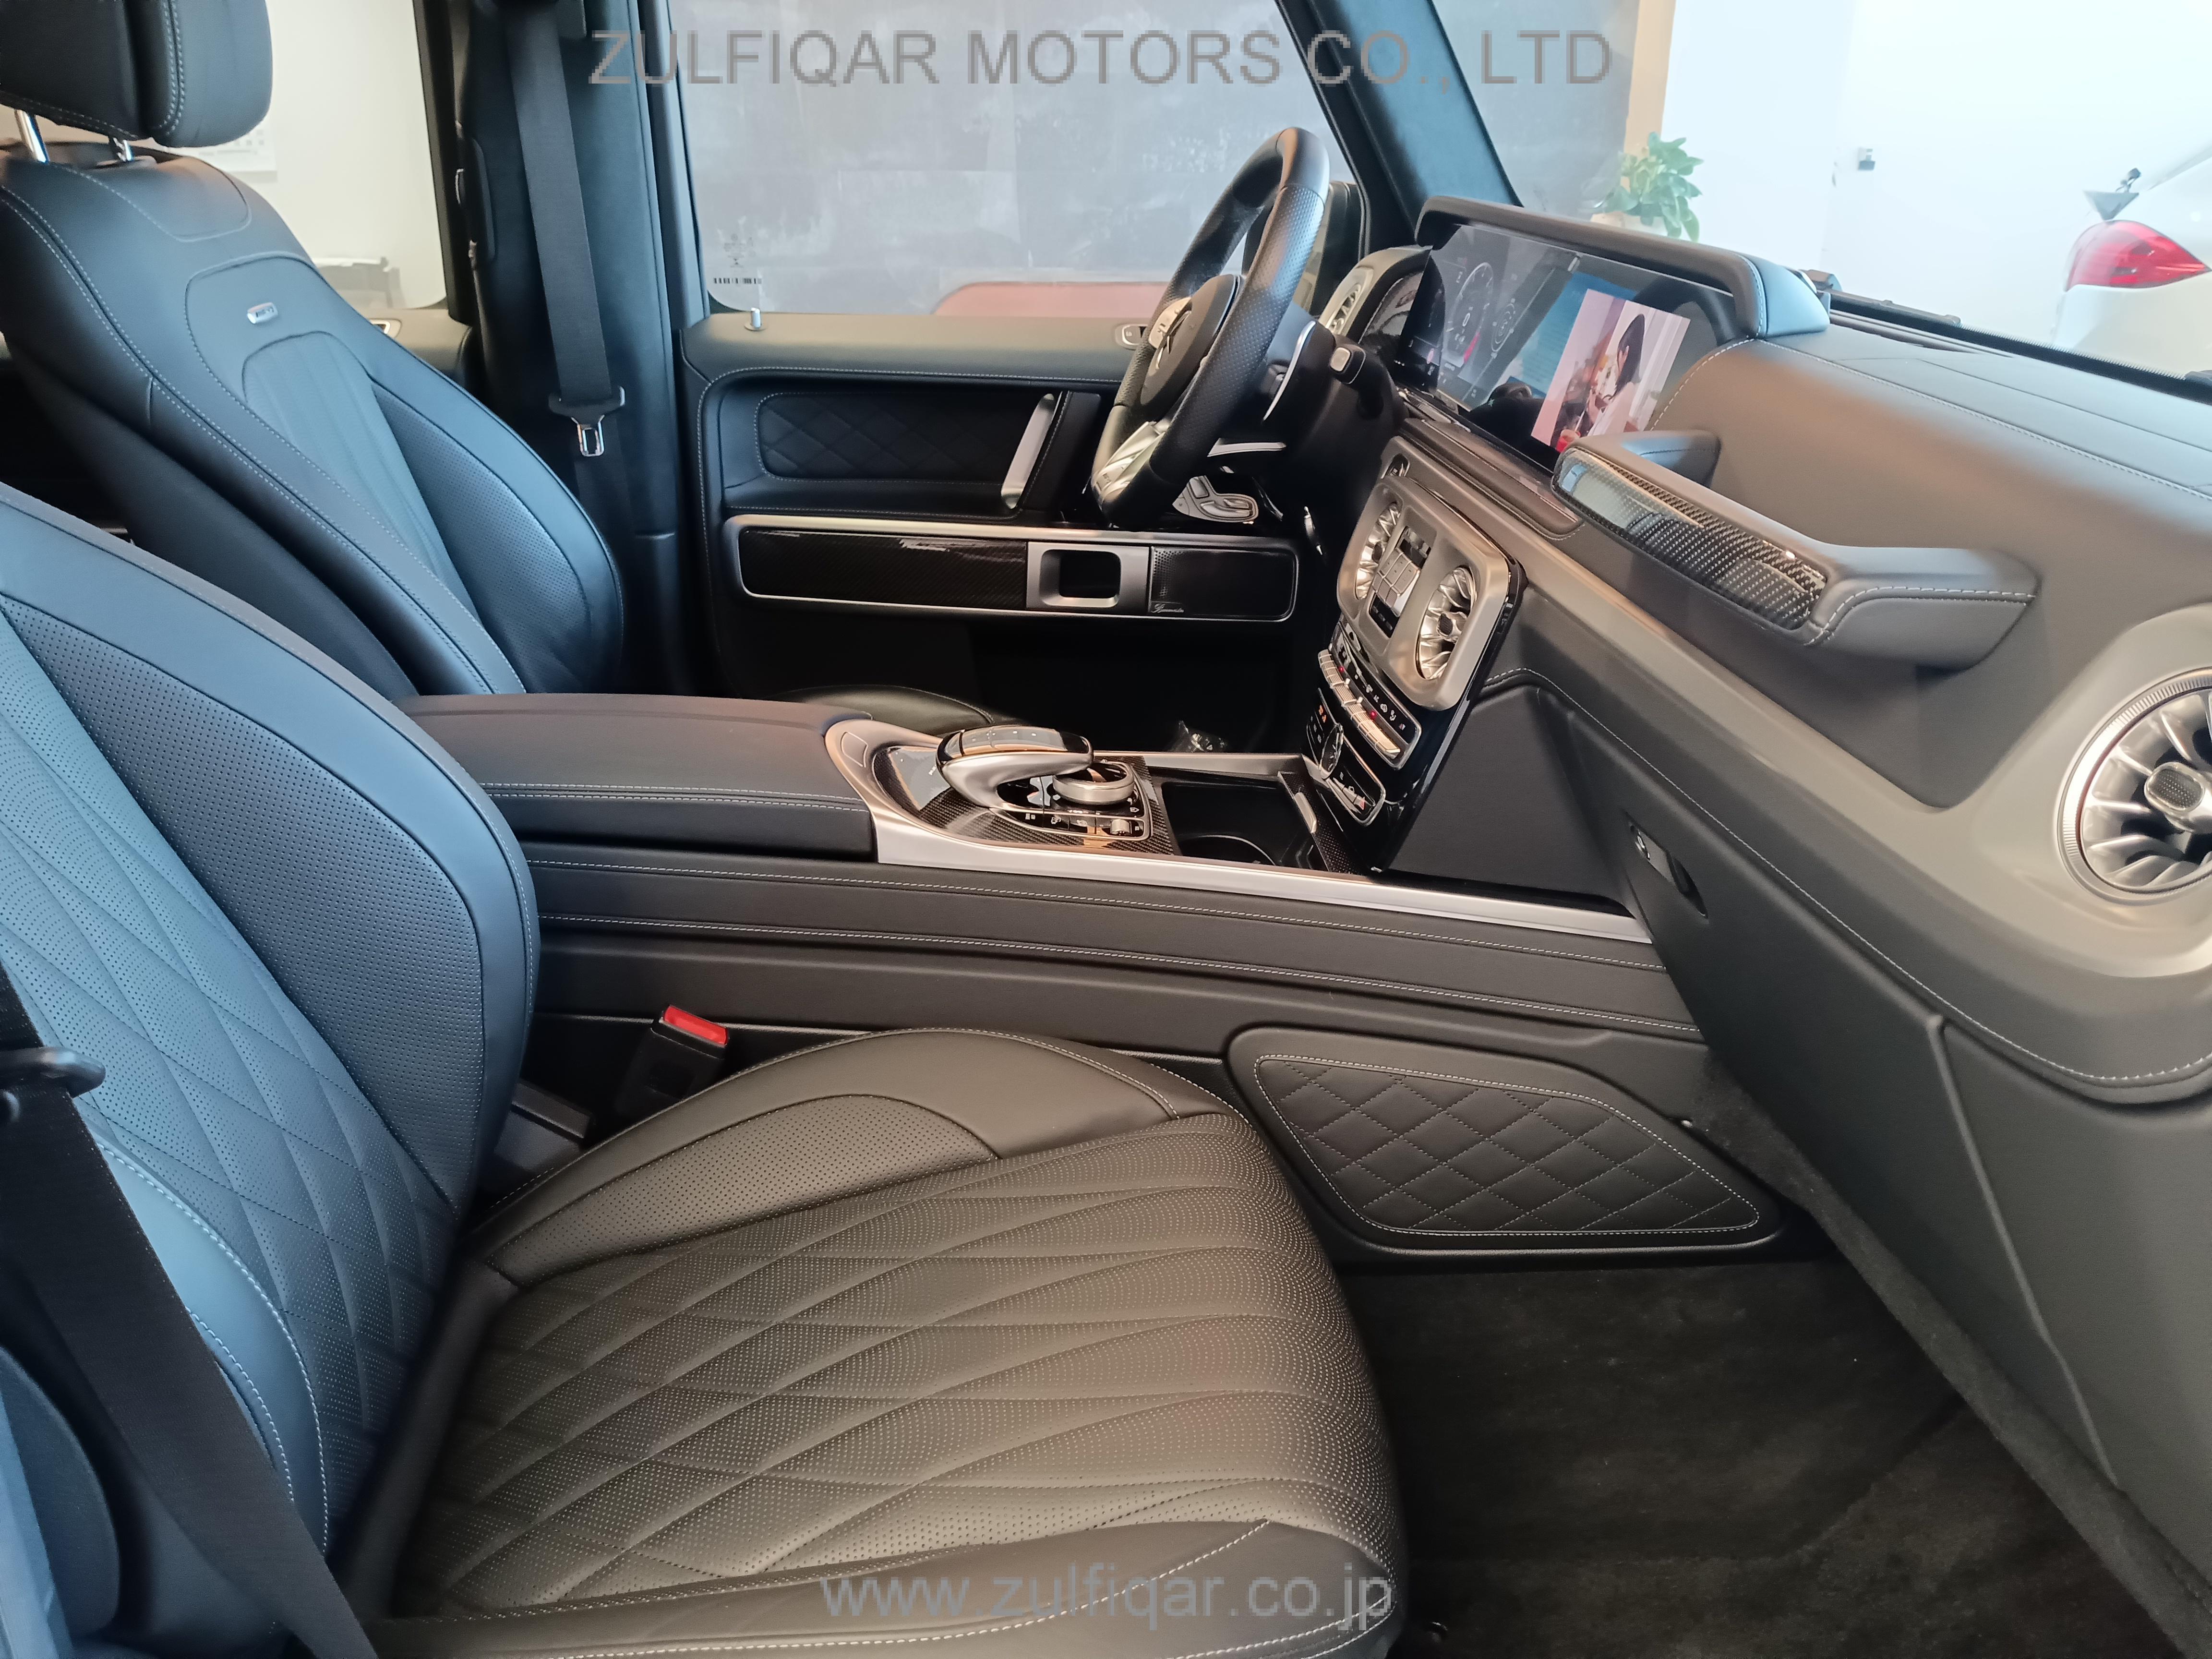 MERCEDES AMG G CLASS 2019 Image 51